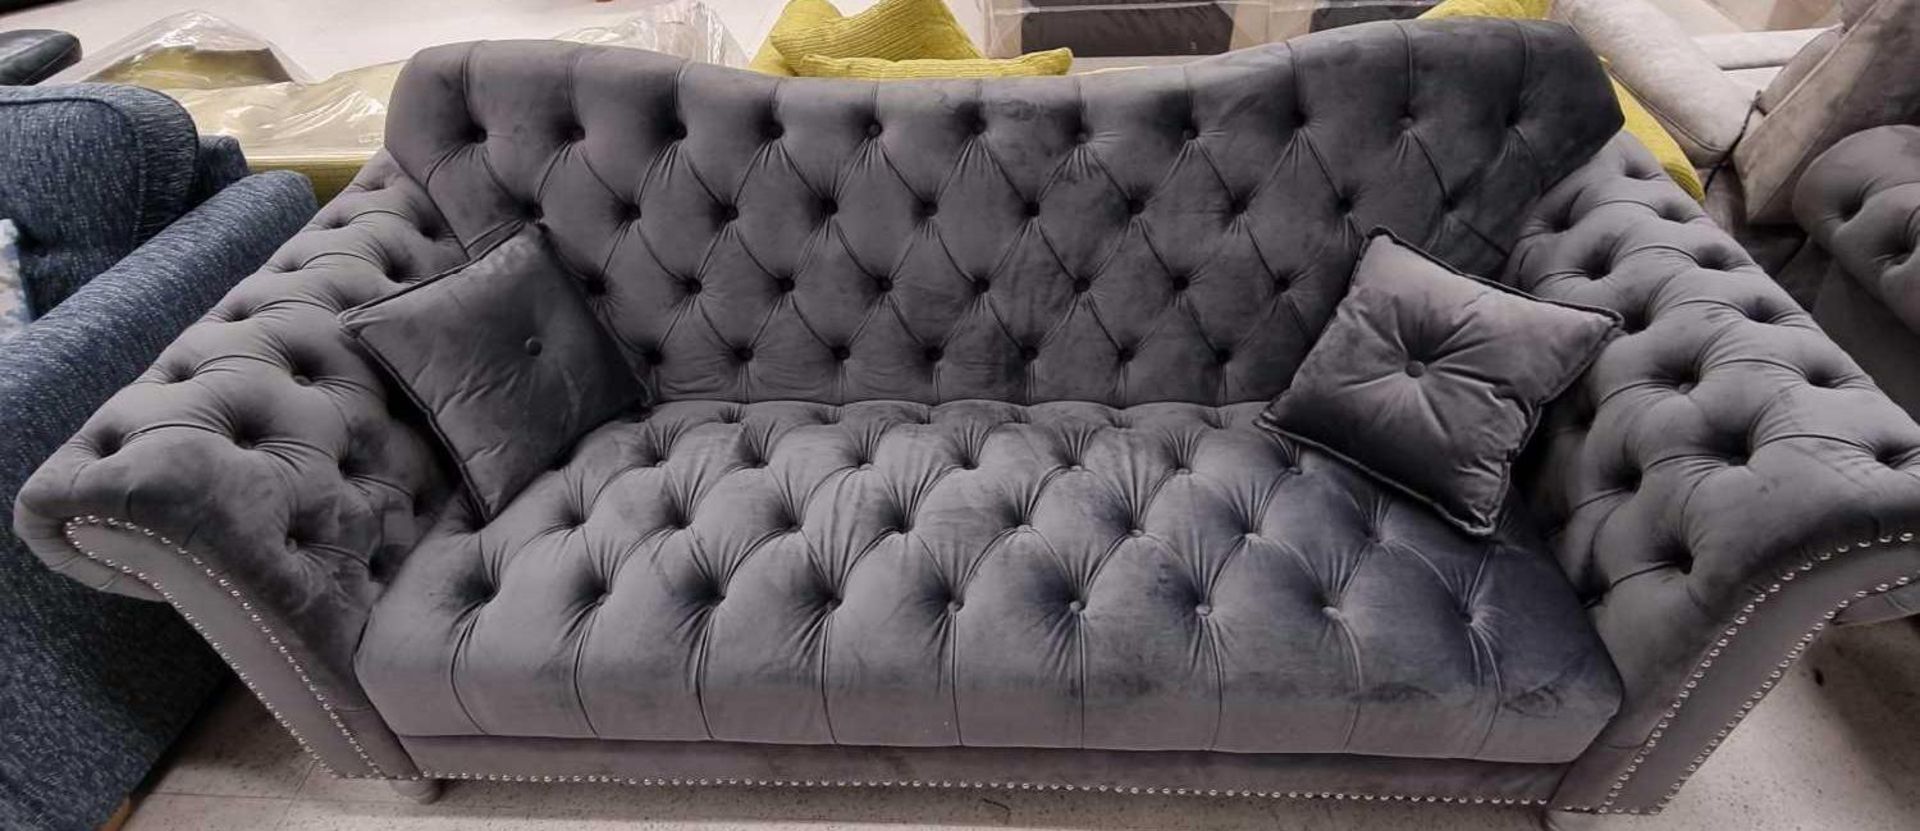 BRAND NEW Dior Chesterfield 3 seater sofa. RRP: £999